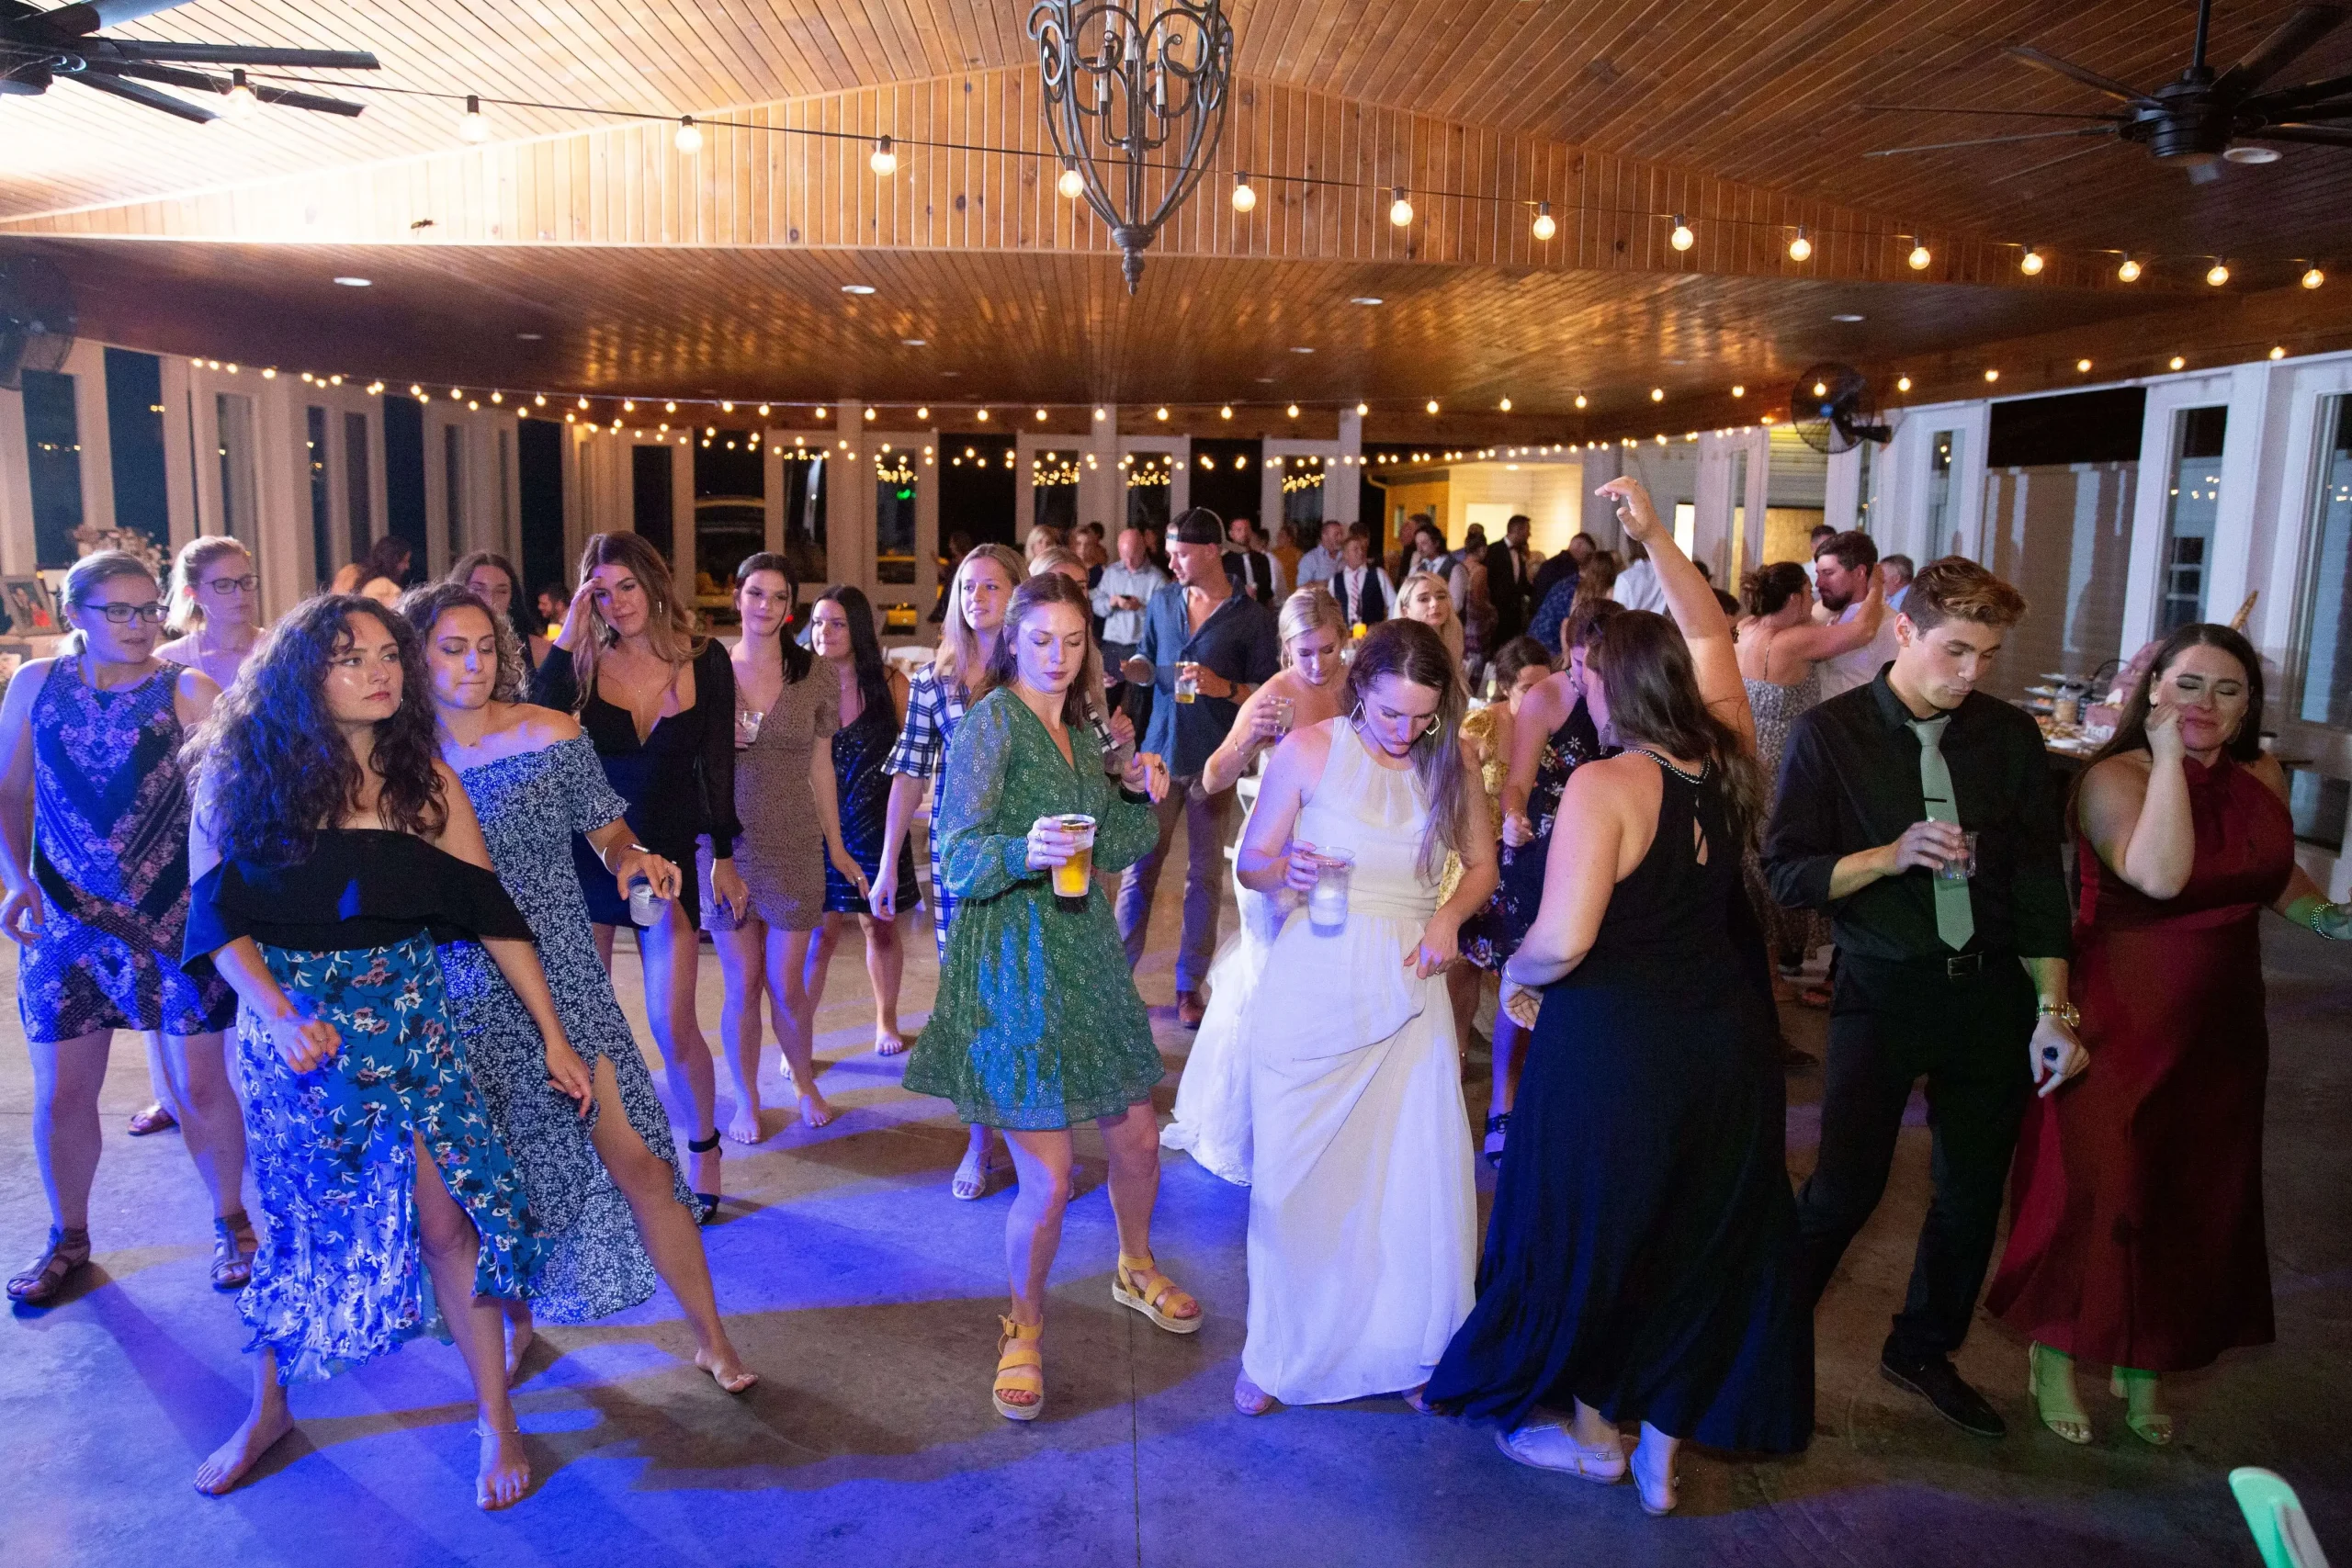 People on a dace floor at a wedding